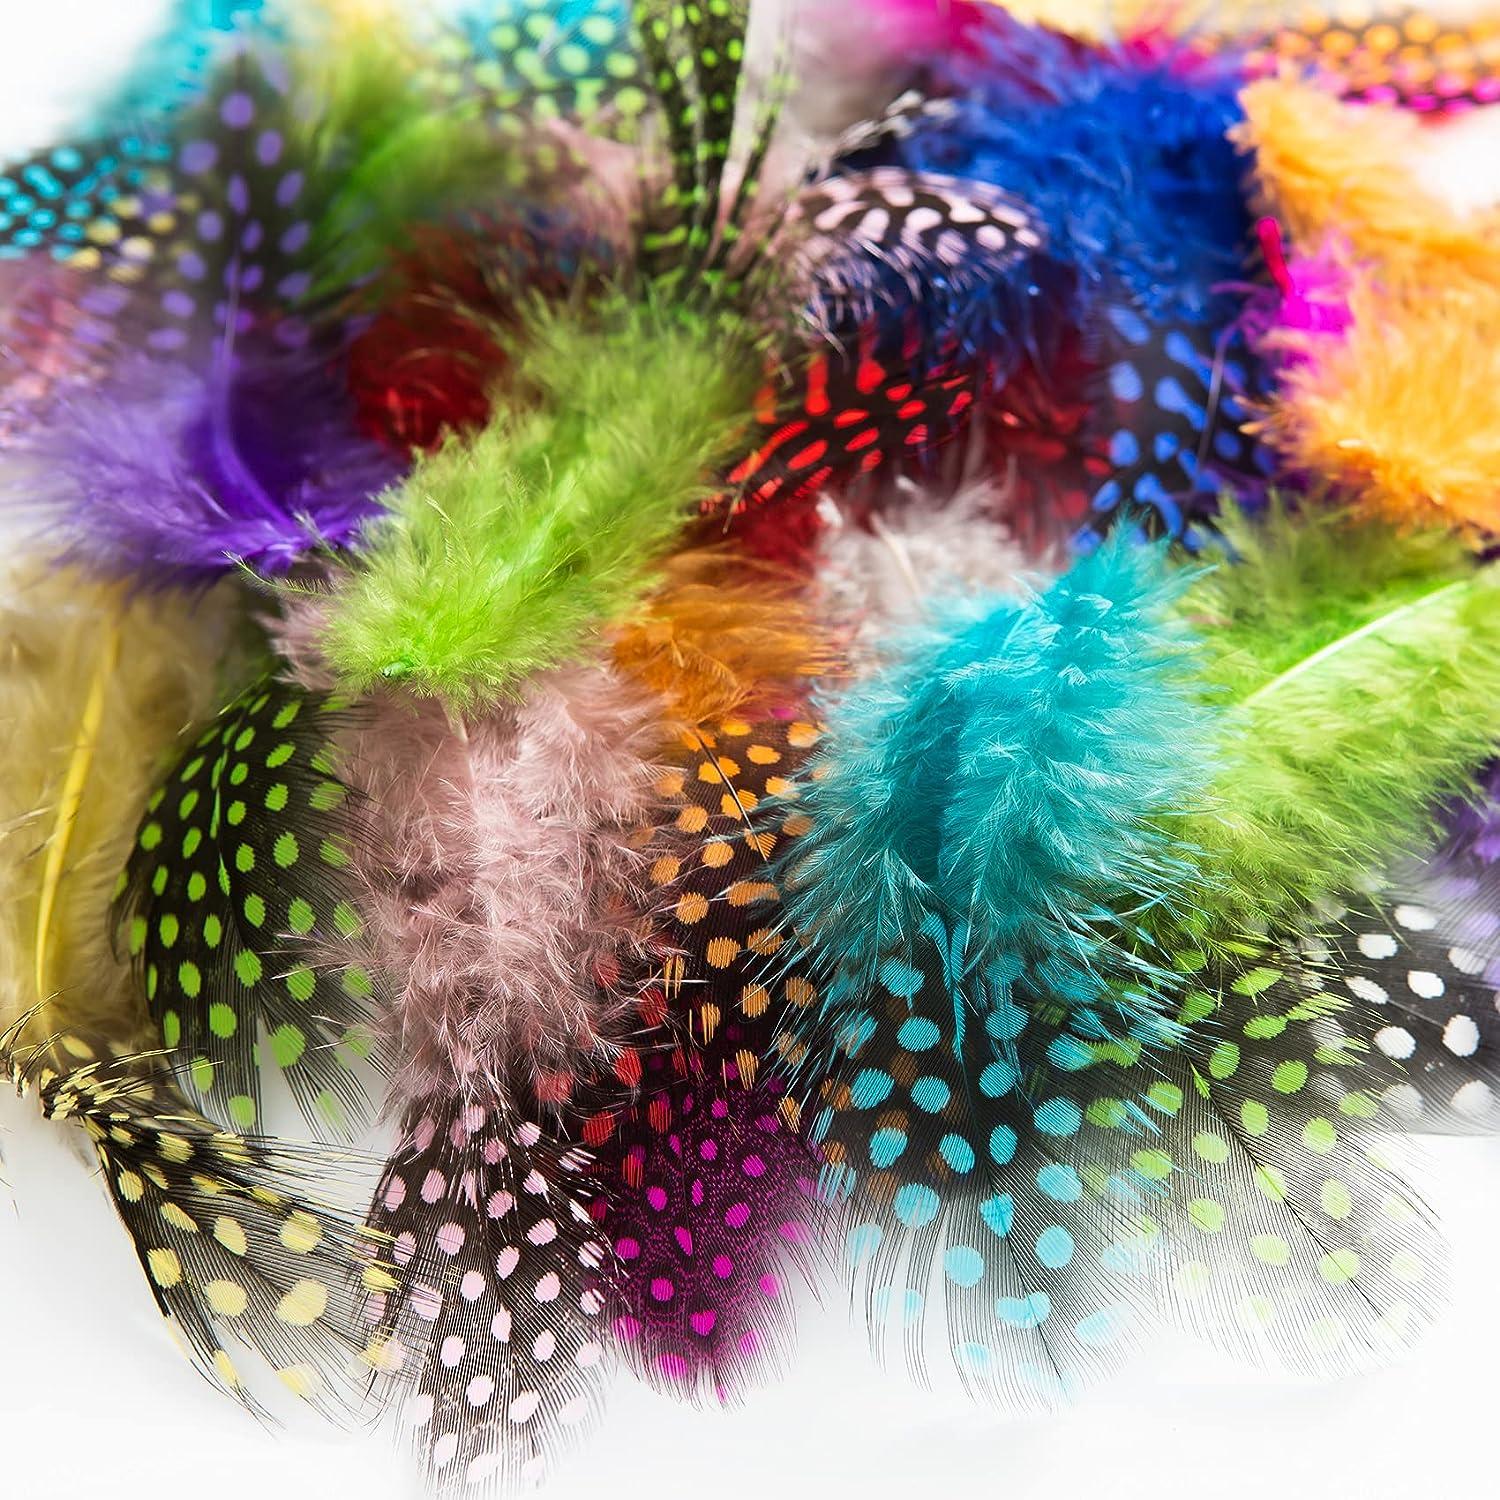 Coceca 300 Pcs Colorful Feathers for DIY Craft Wedding Home Party Decorations